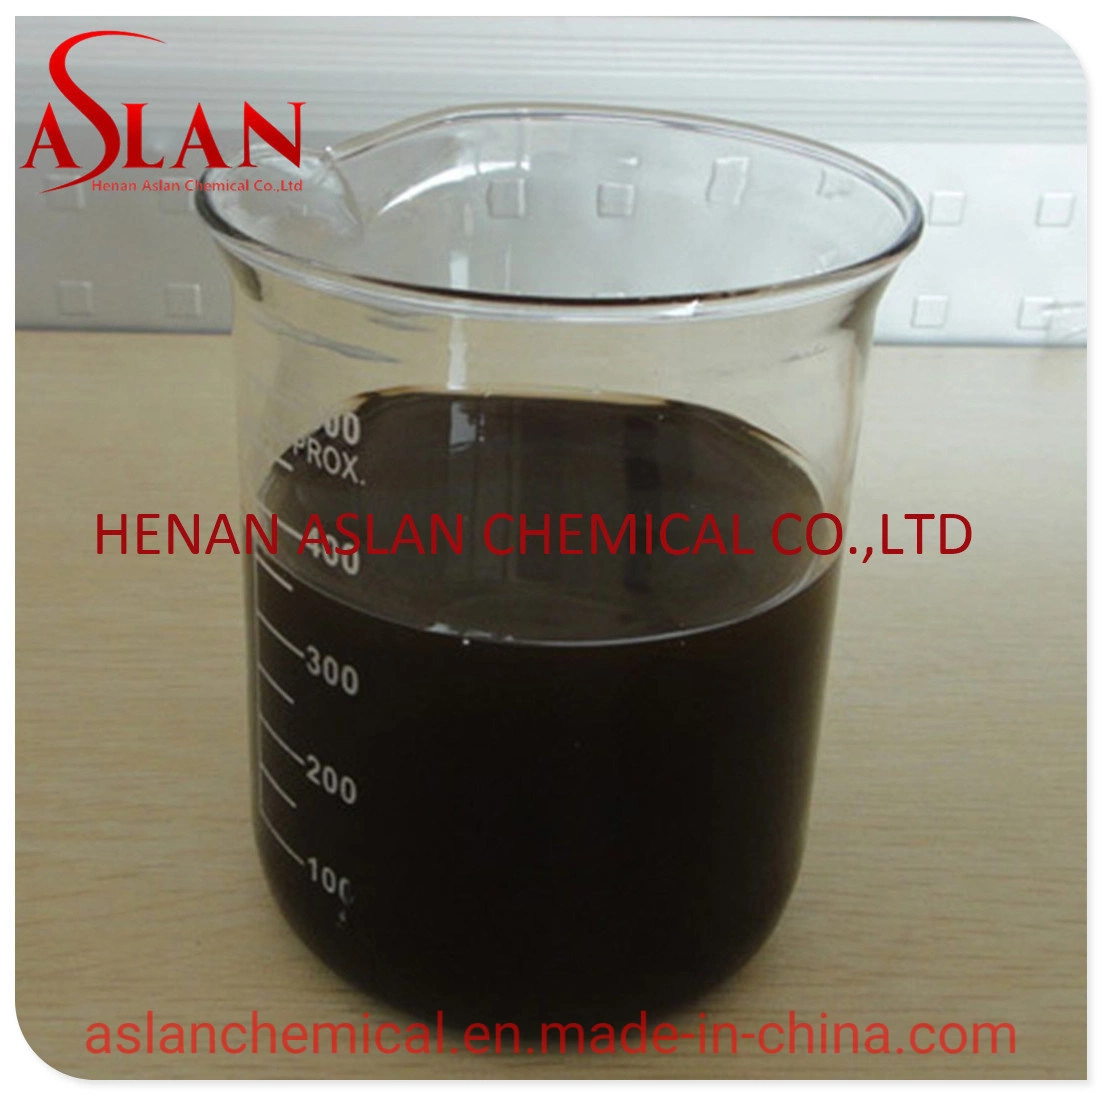 Linear Alkyl Benzene Sulfonic Acid LABSA 96% / Soap and Detergents, Cosmetics and Various Household Products/Leading Provider of Raw Materials